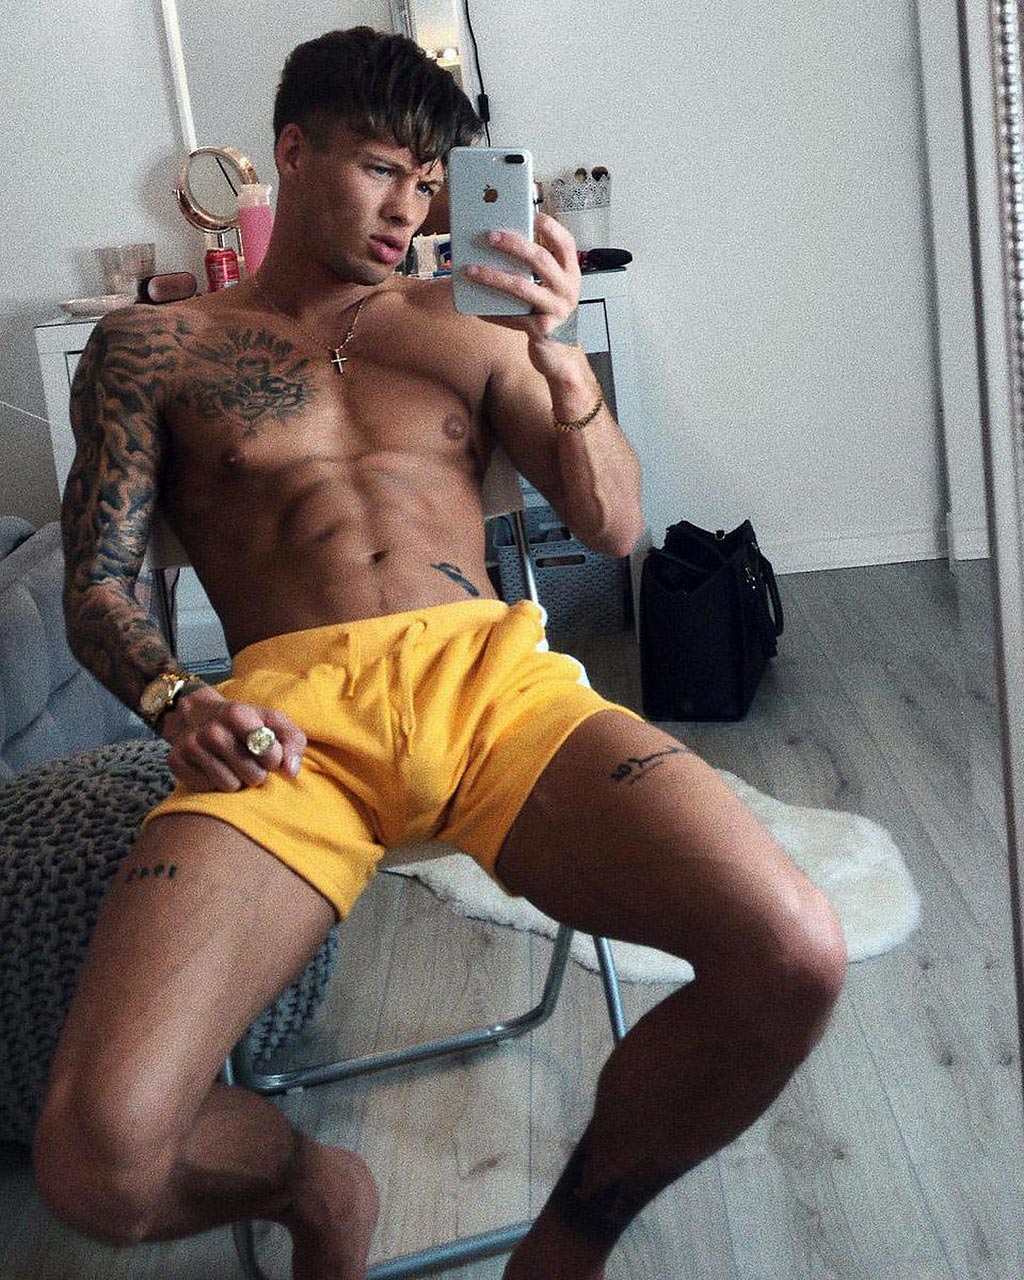 Christian jude onlyfans nudes